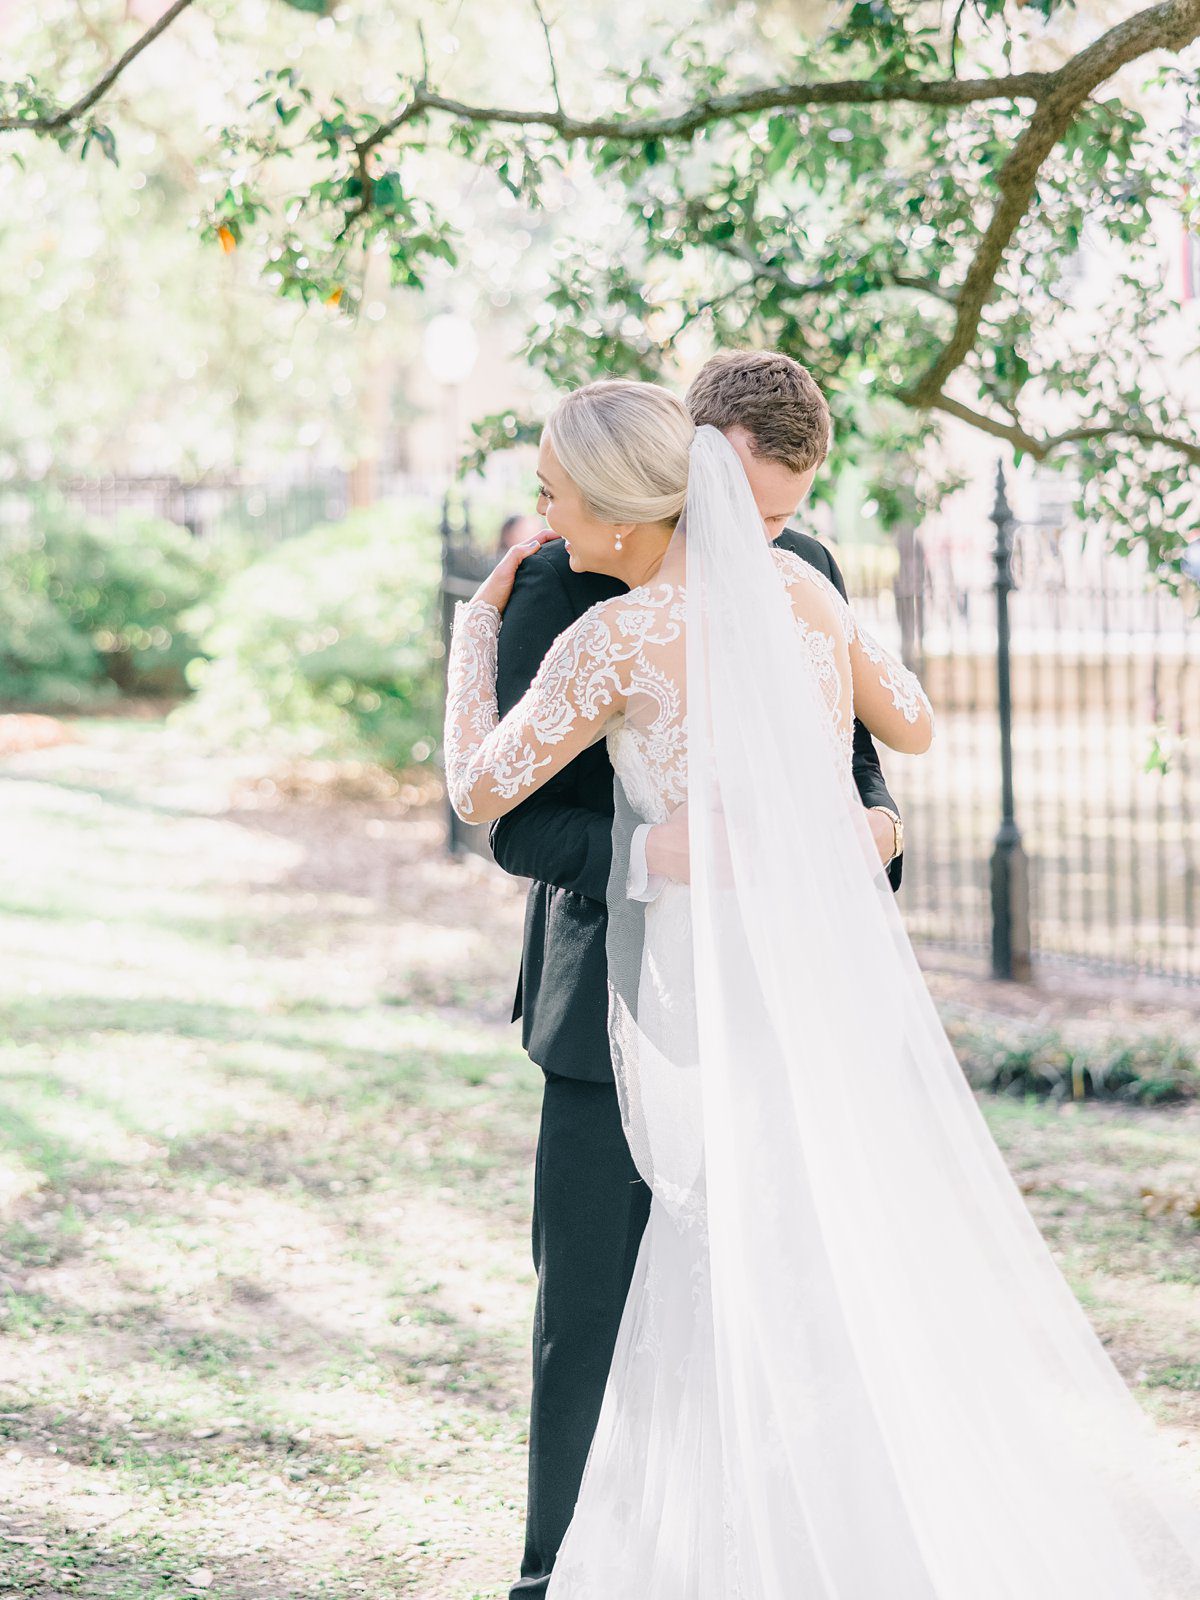 A bride and groom share and intimate hug after their first look